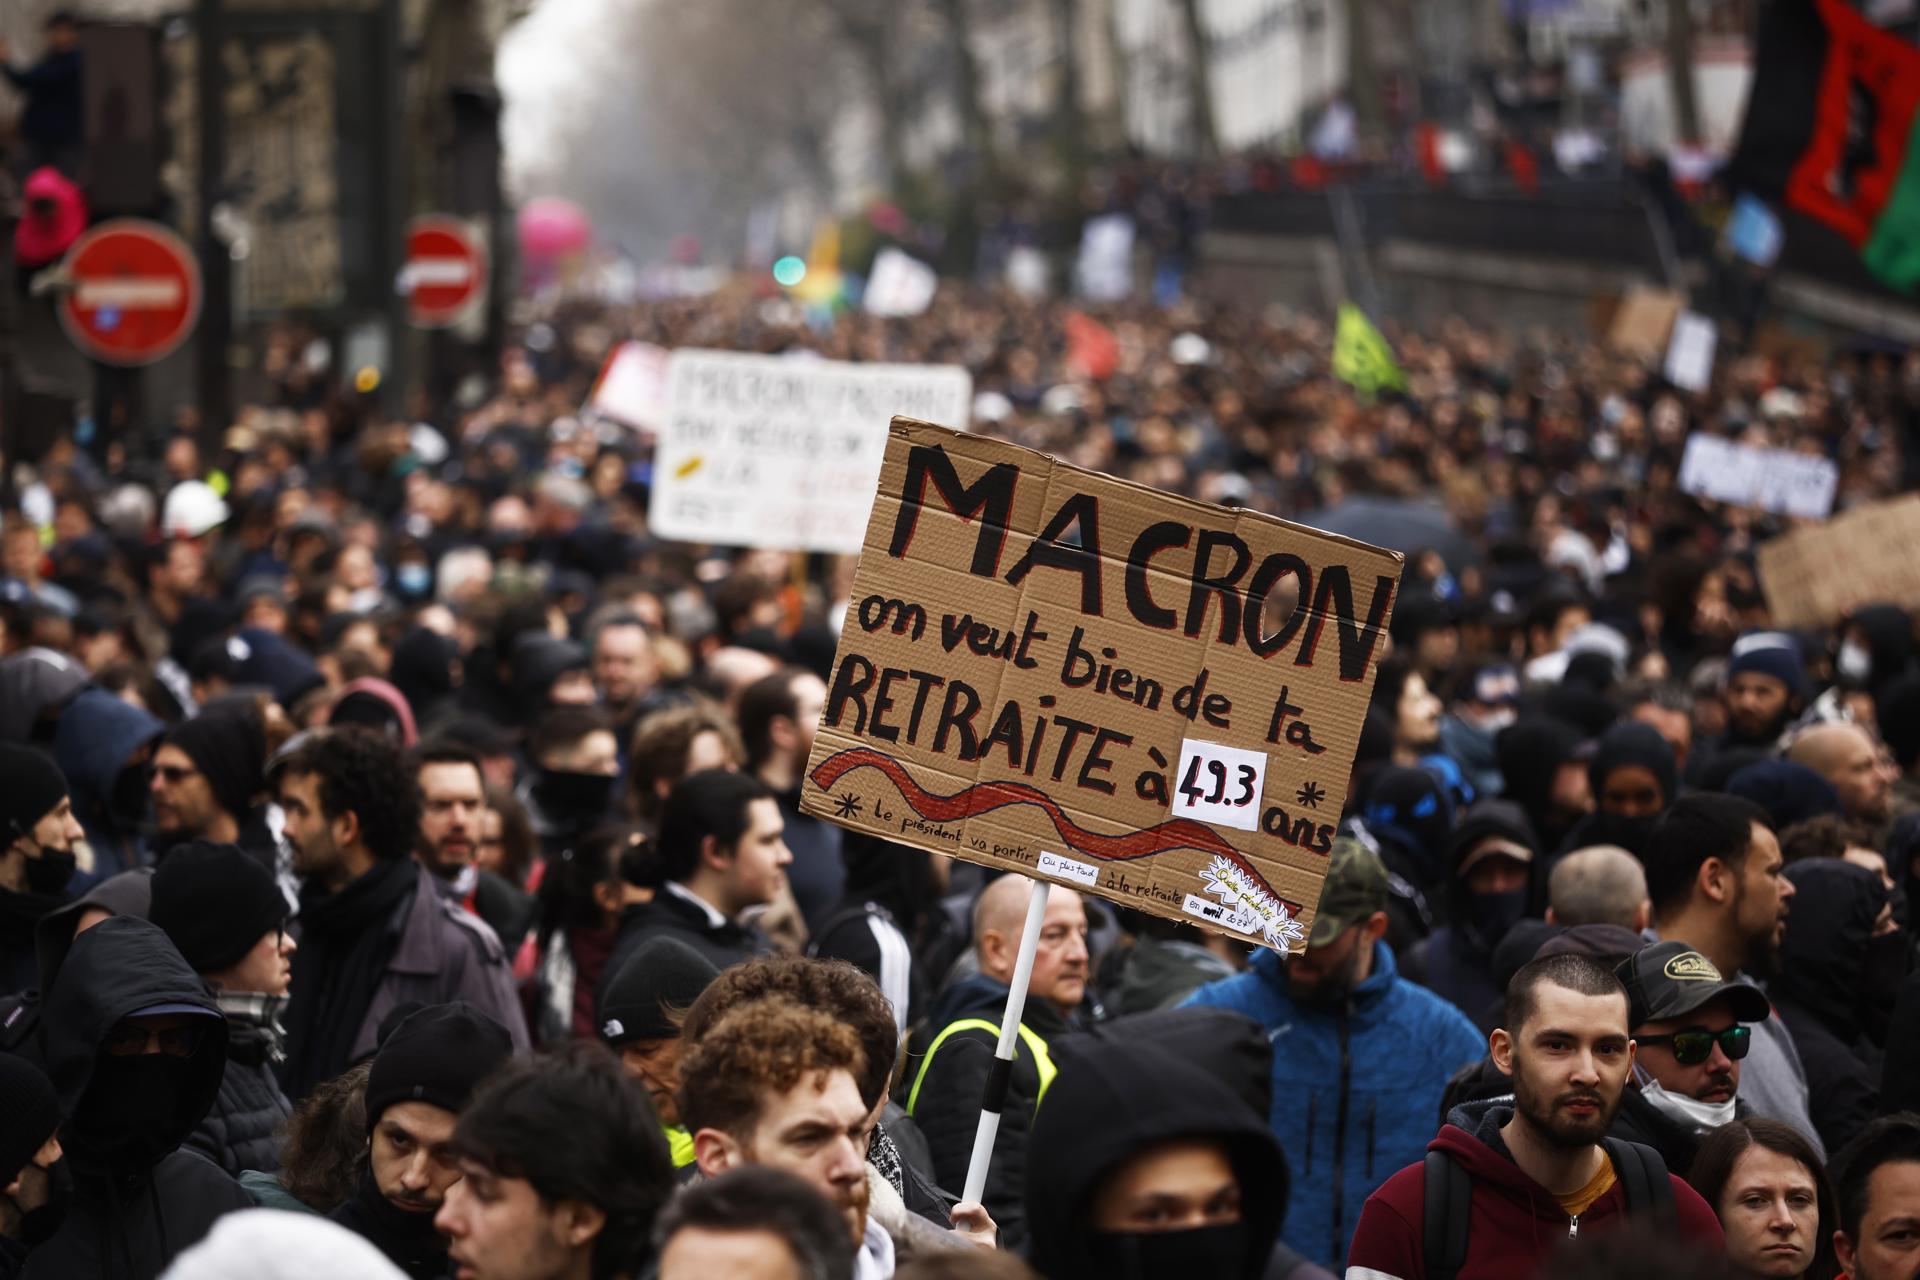 A demonstrator carries a sing 'Macron, we want your retirement at 49.3 years' during the protest against the government's reform of the pension system in Paris, France, 23 March 2023. EFE/EPA/YOAN VALAT